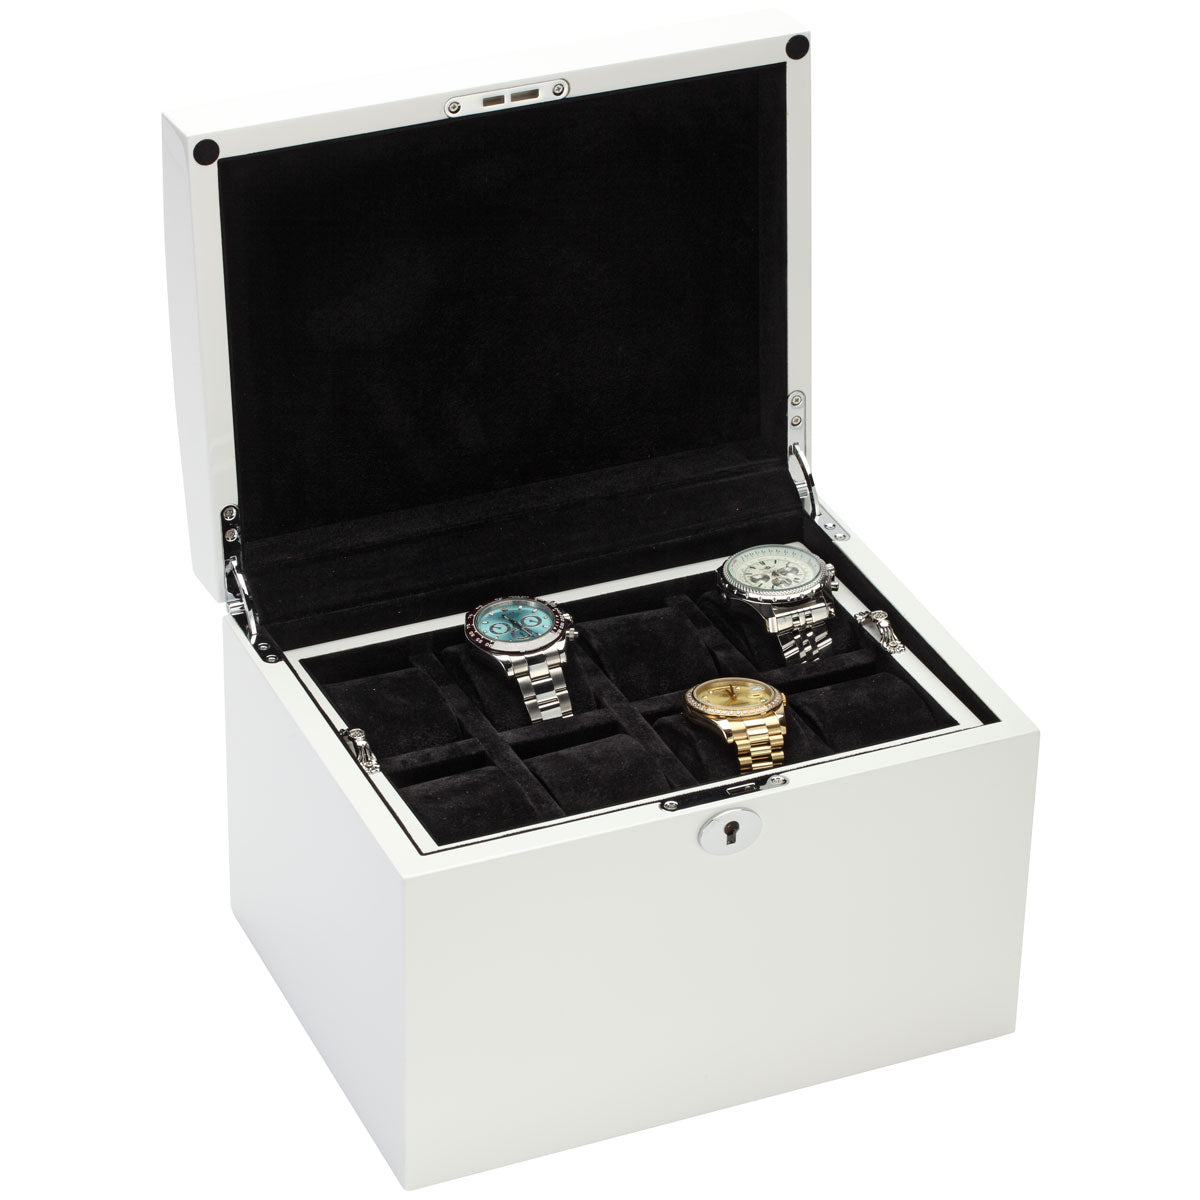 Diplomat "Prestige" 16-Watch Cases w/Removable Inner Tray